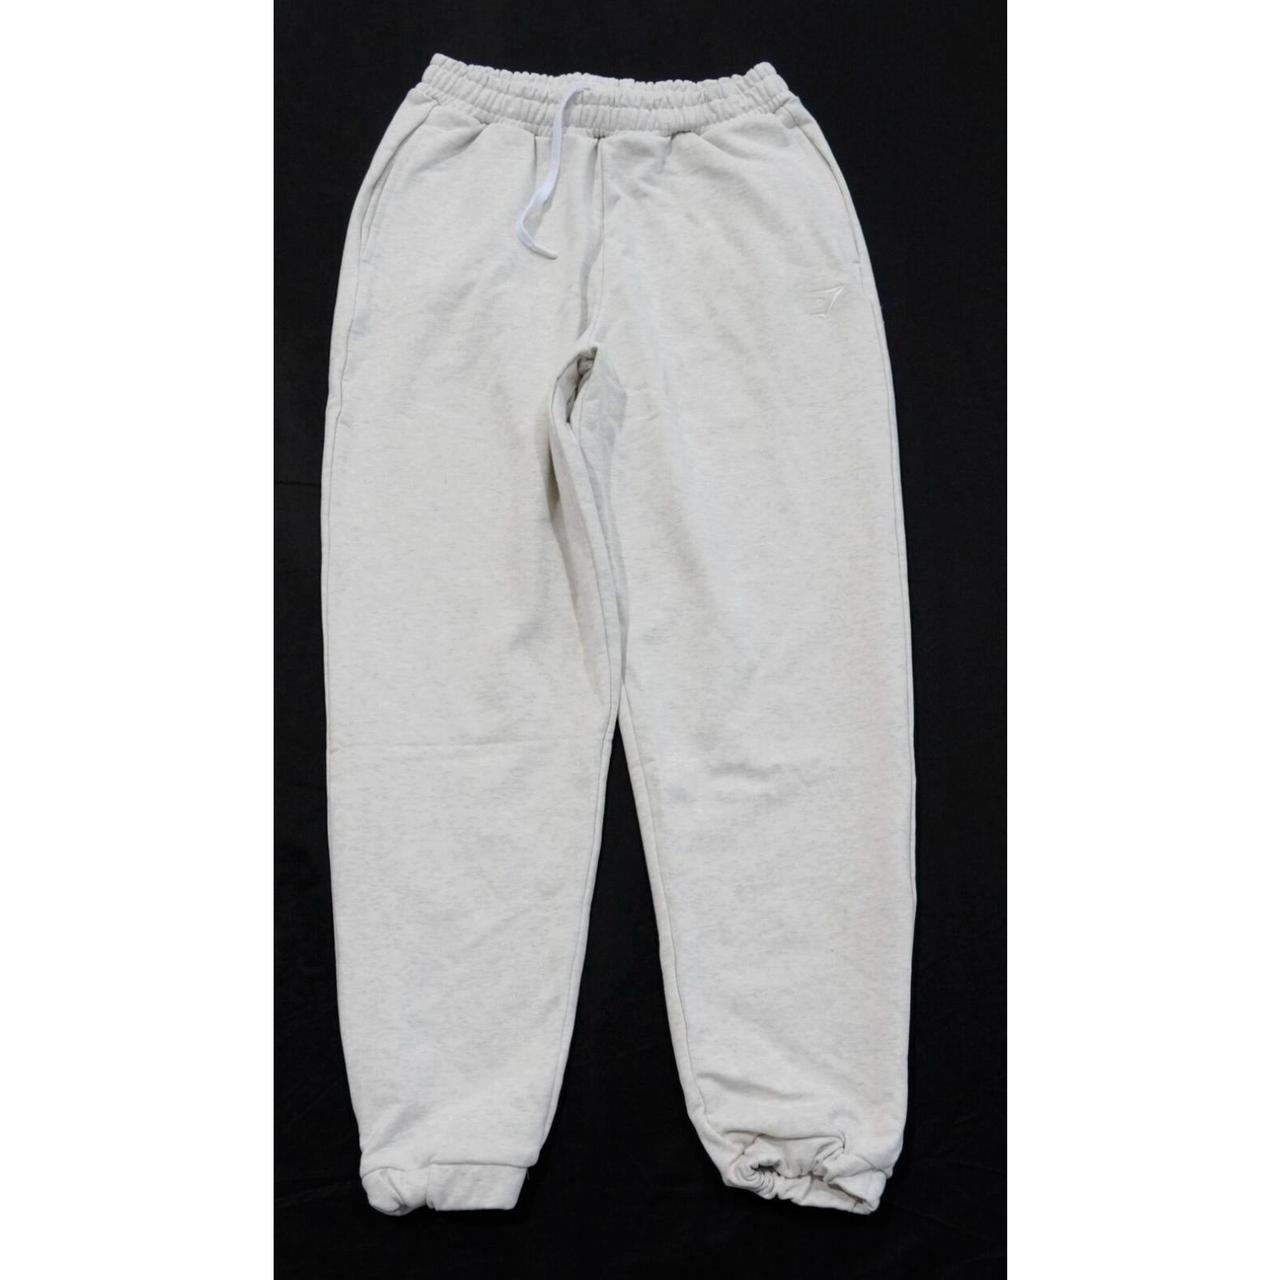 Gymshark Rest Day Sweats Joggers - White Marl